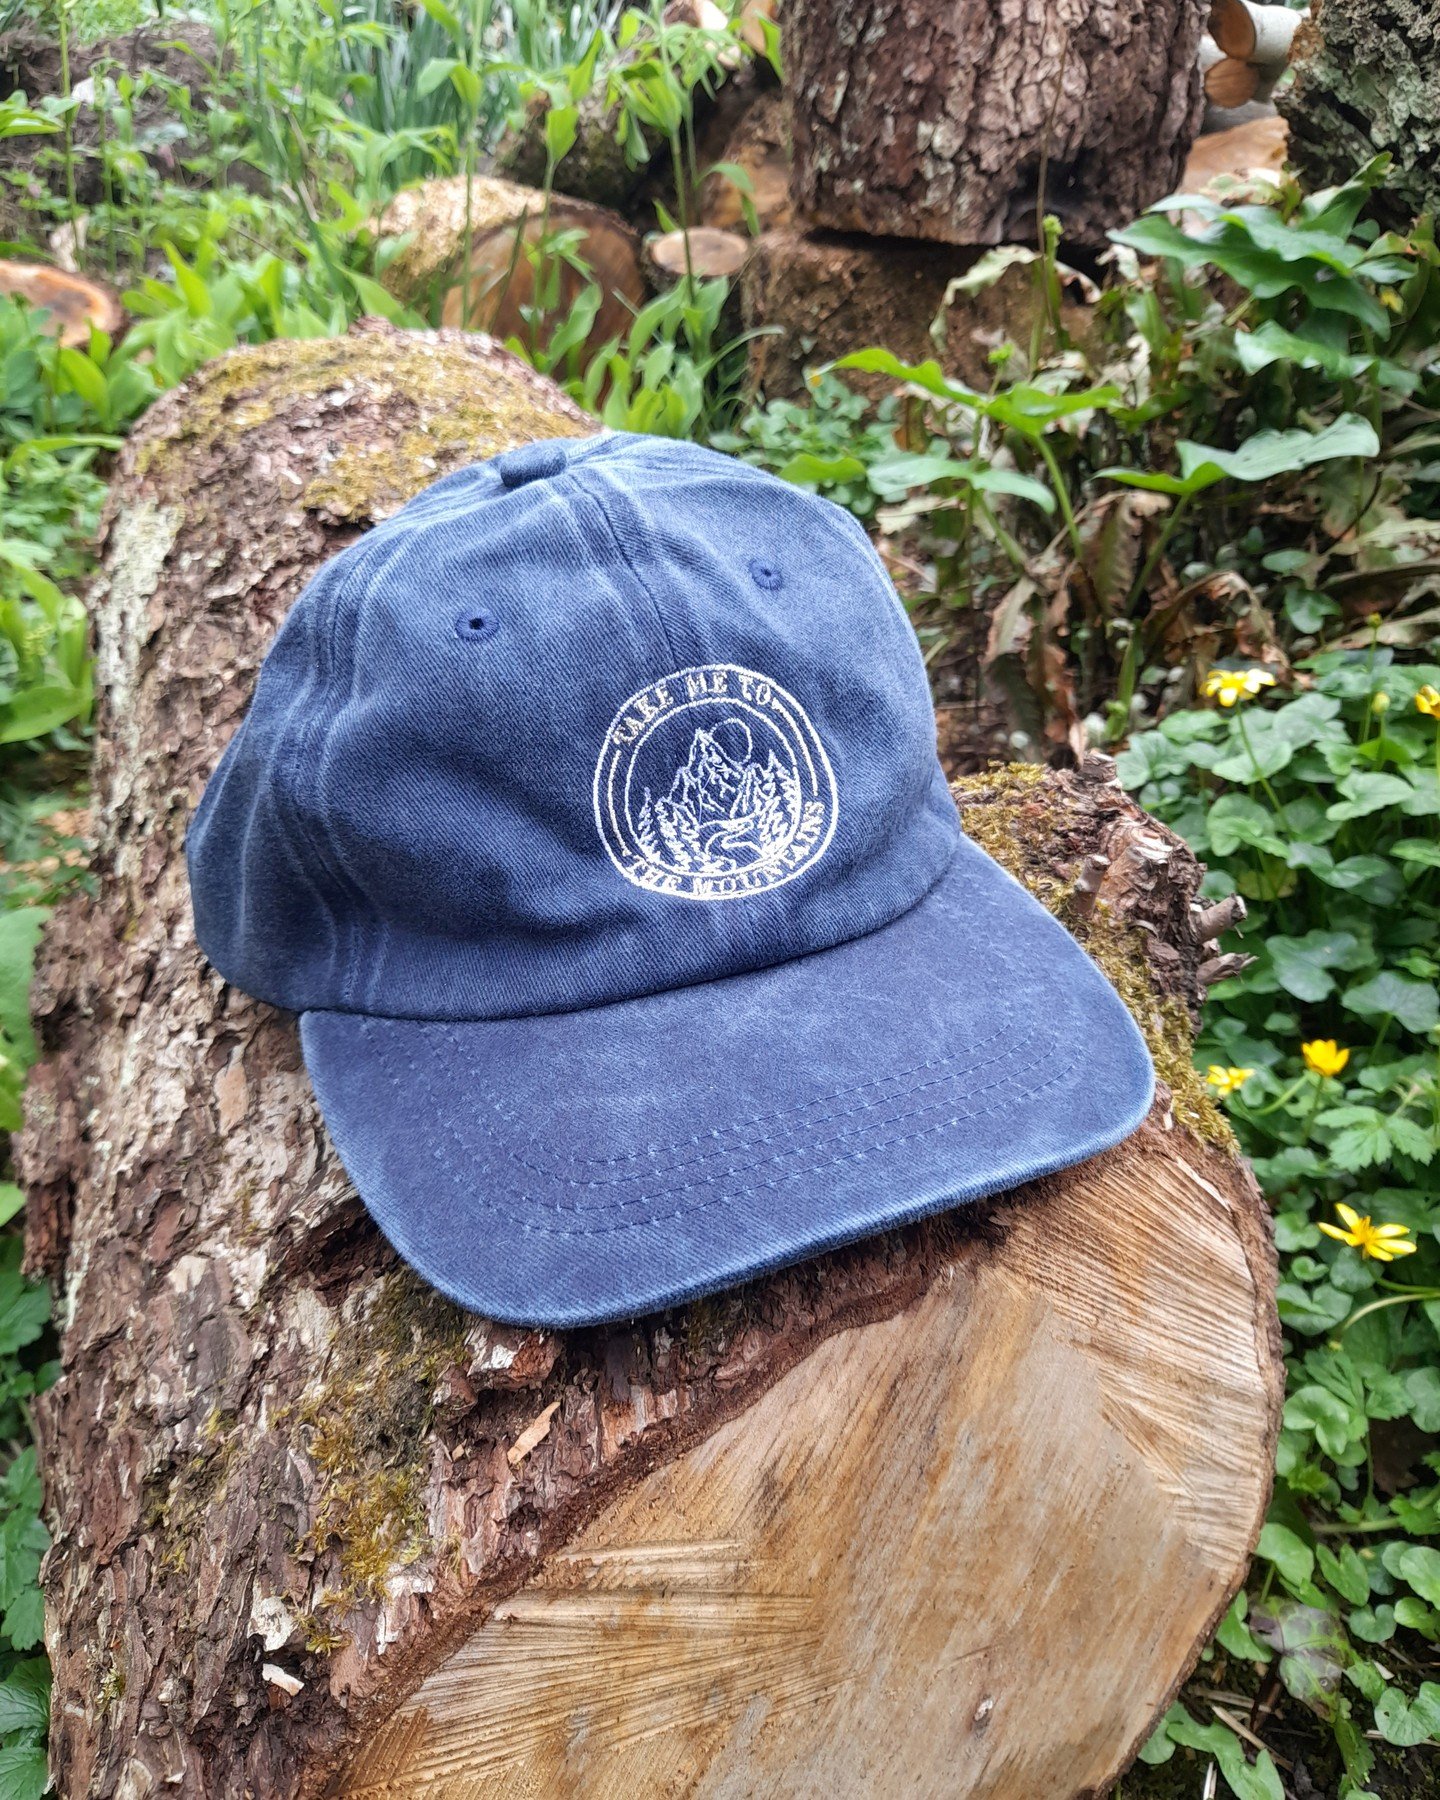 'Take me to the mountains' caps are now available to shop through my website! In Blue &amp; Pink options!!😊⛰️ 

#cap #embroideredcap #climber #bouldering #mountains #climbinggifts #mountaineering #digitalembroidery #summer